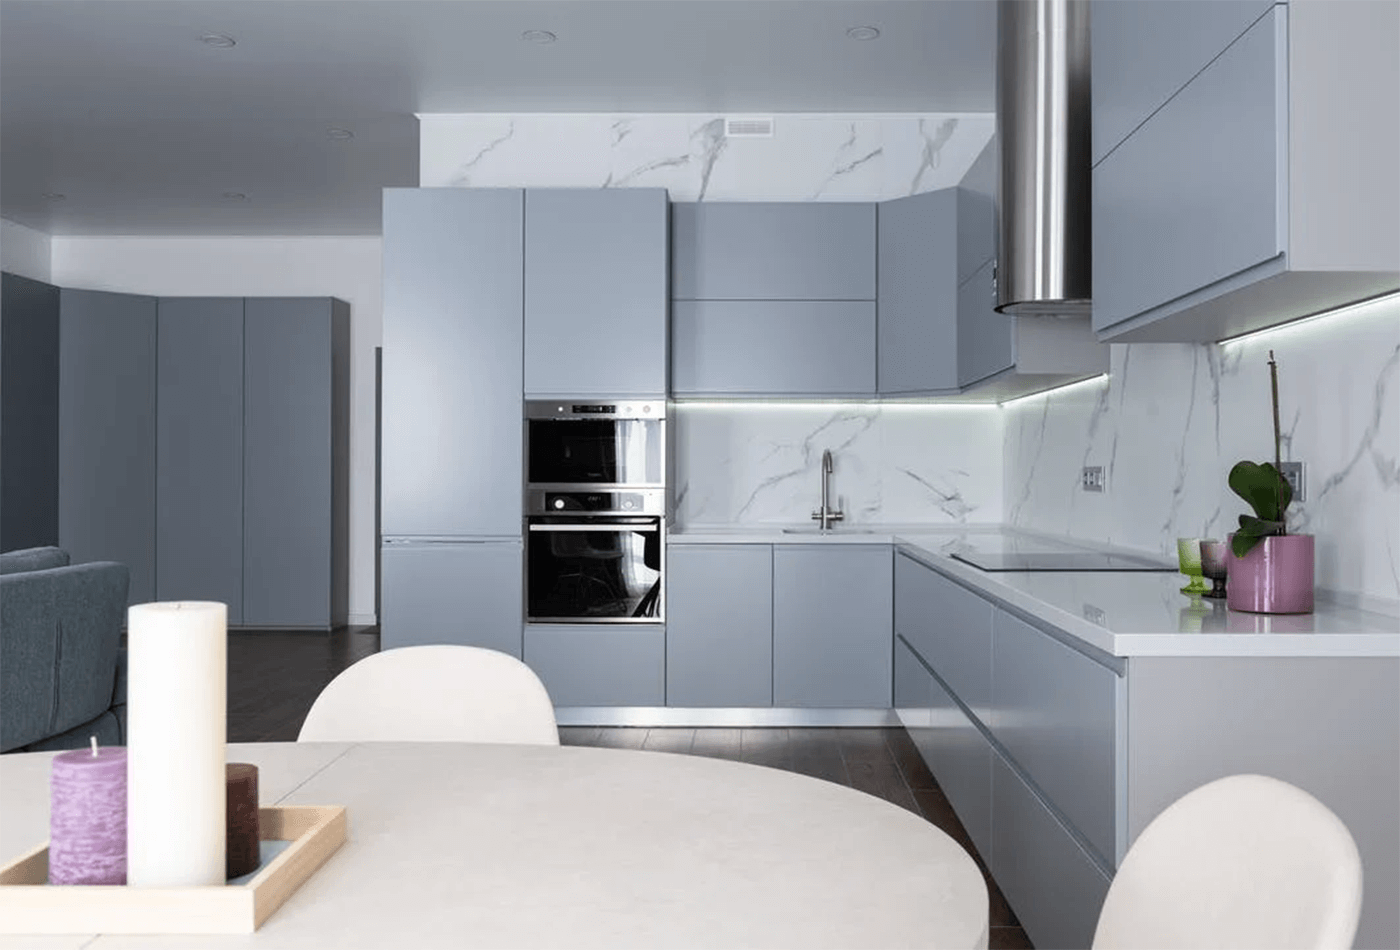 L-Shaped Kitchen Design & Tips You Can Use From Them